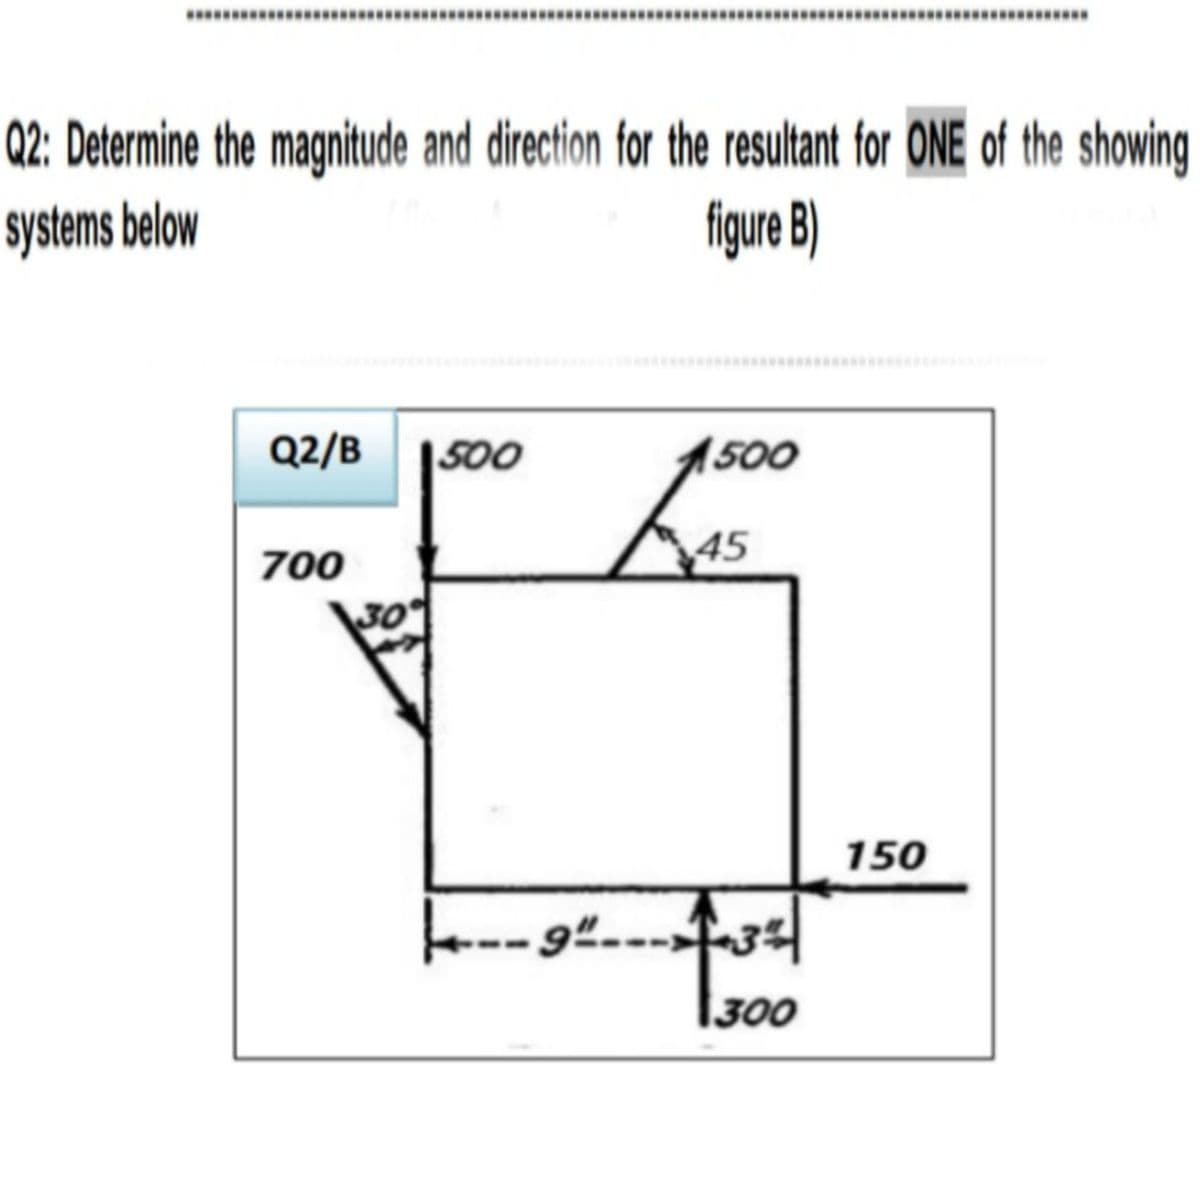 **** .
Q2: Determine the magnitude and direction for the resultant for ONE of the showing
figure B)
systems below
Q2/B 1500
(500
45
700
150
|300
